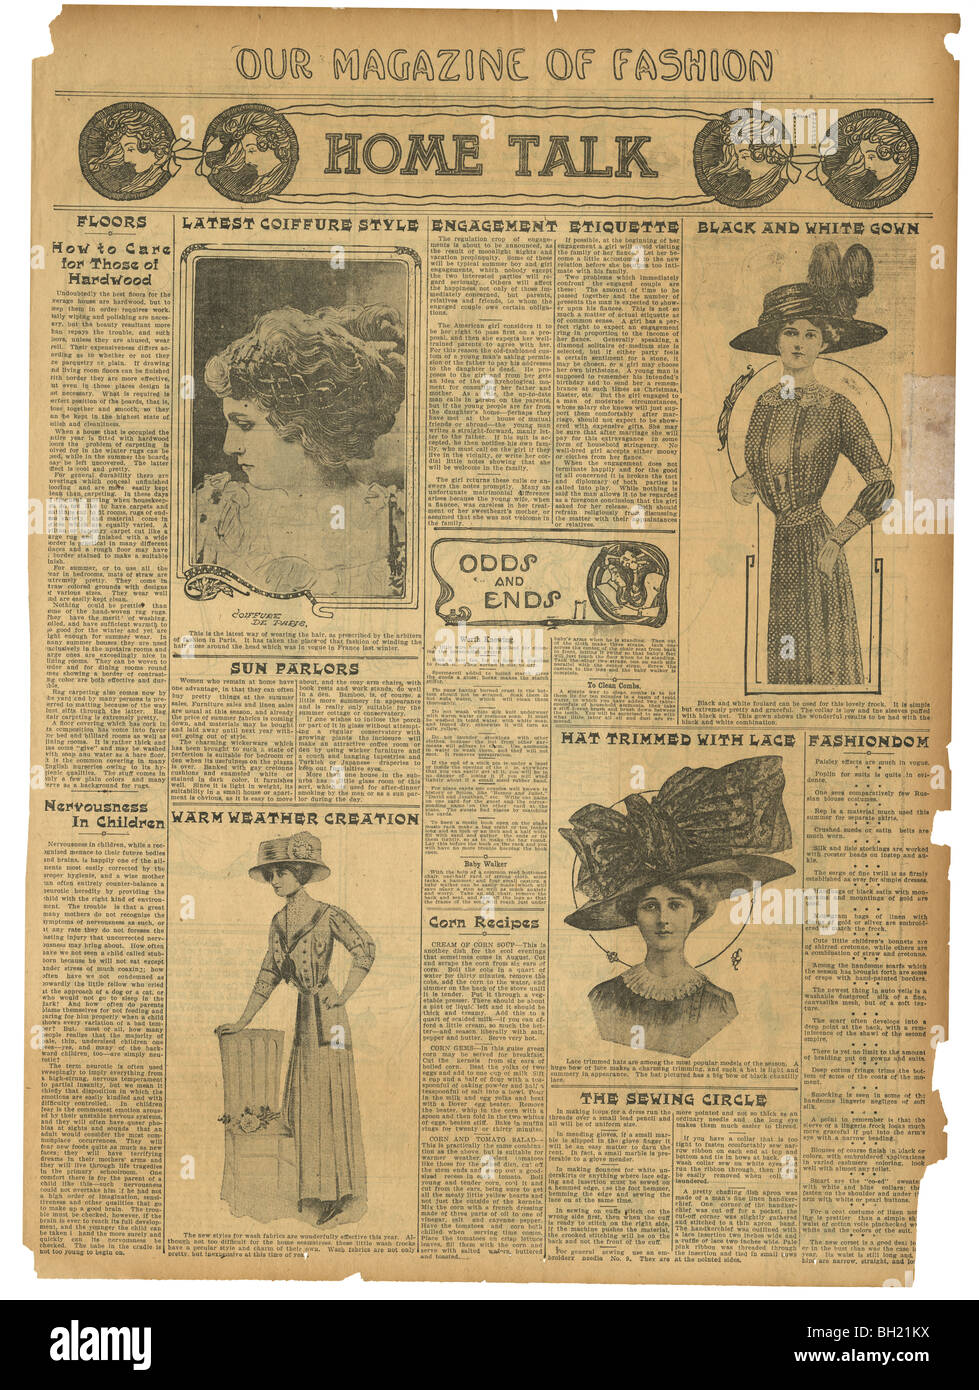 1910 newspaper 'Home Talk' page from Our Magazine of Fashion. Stock Photo